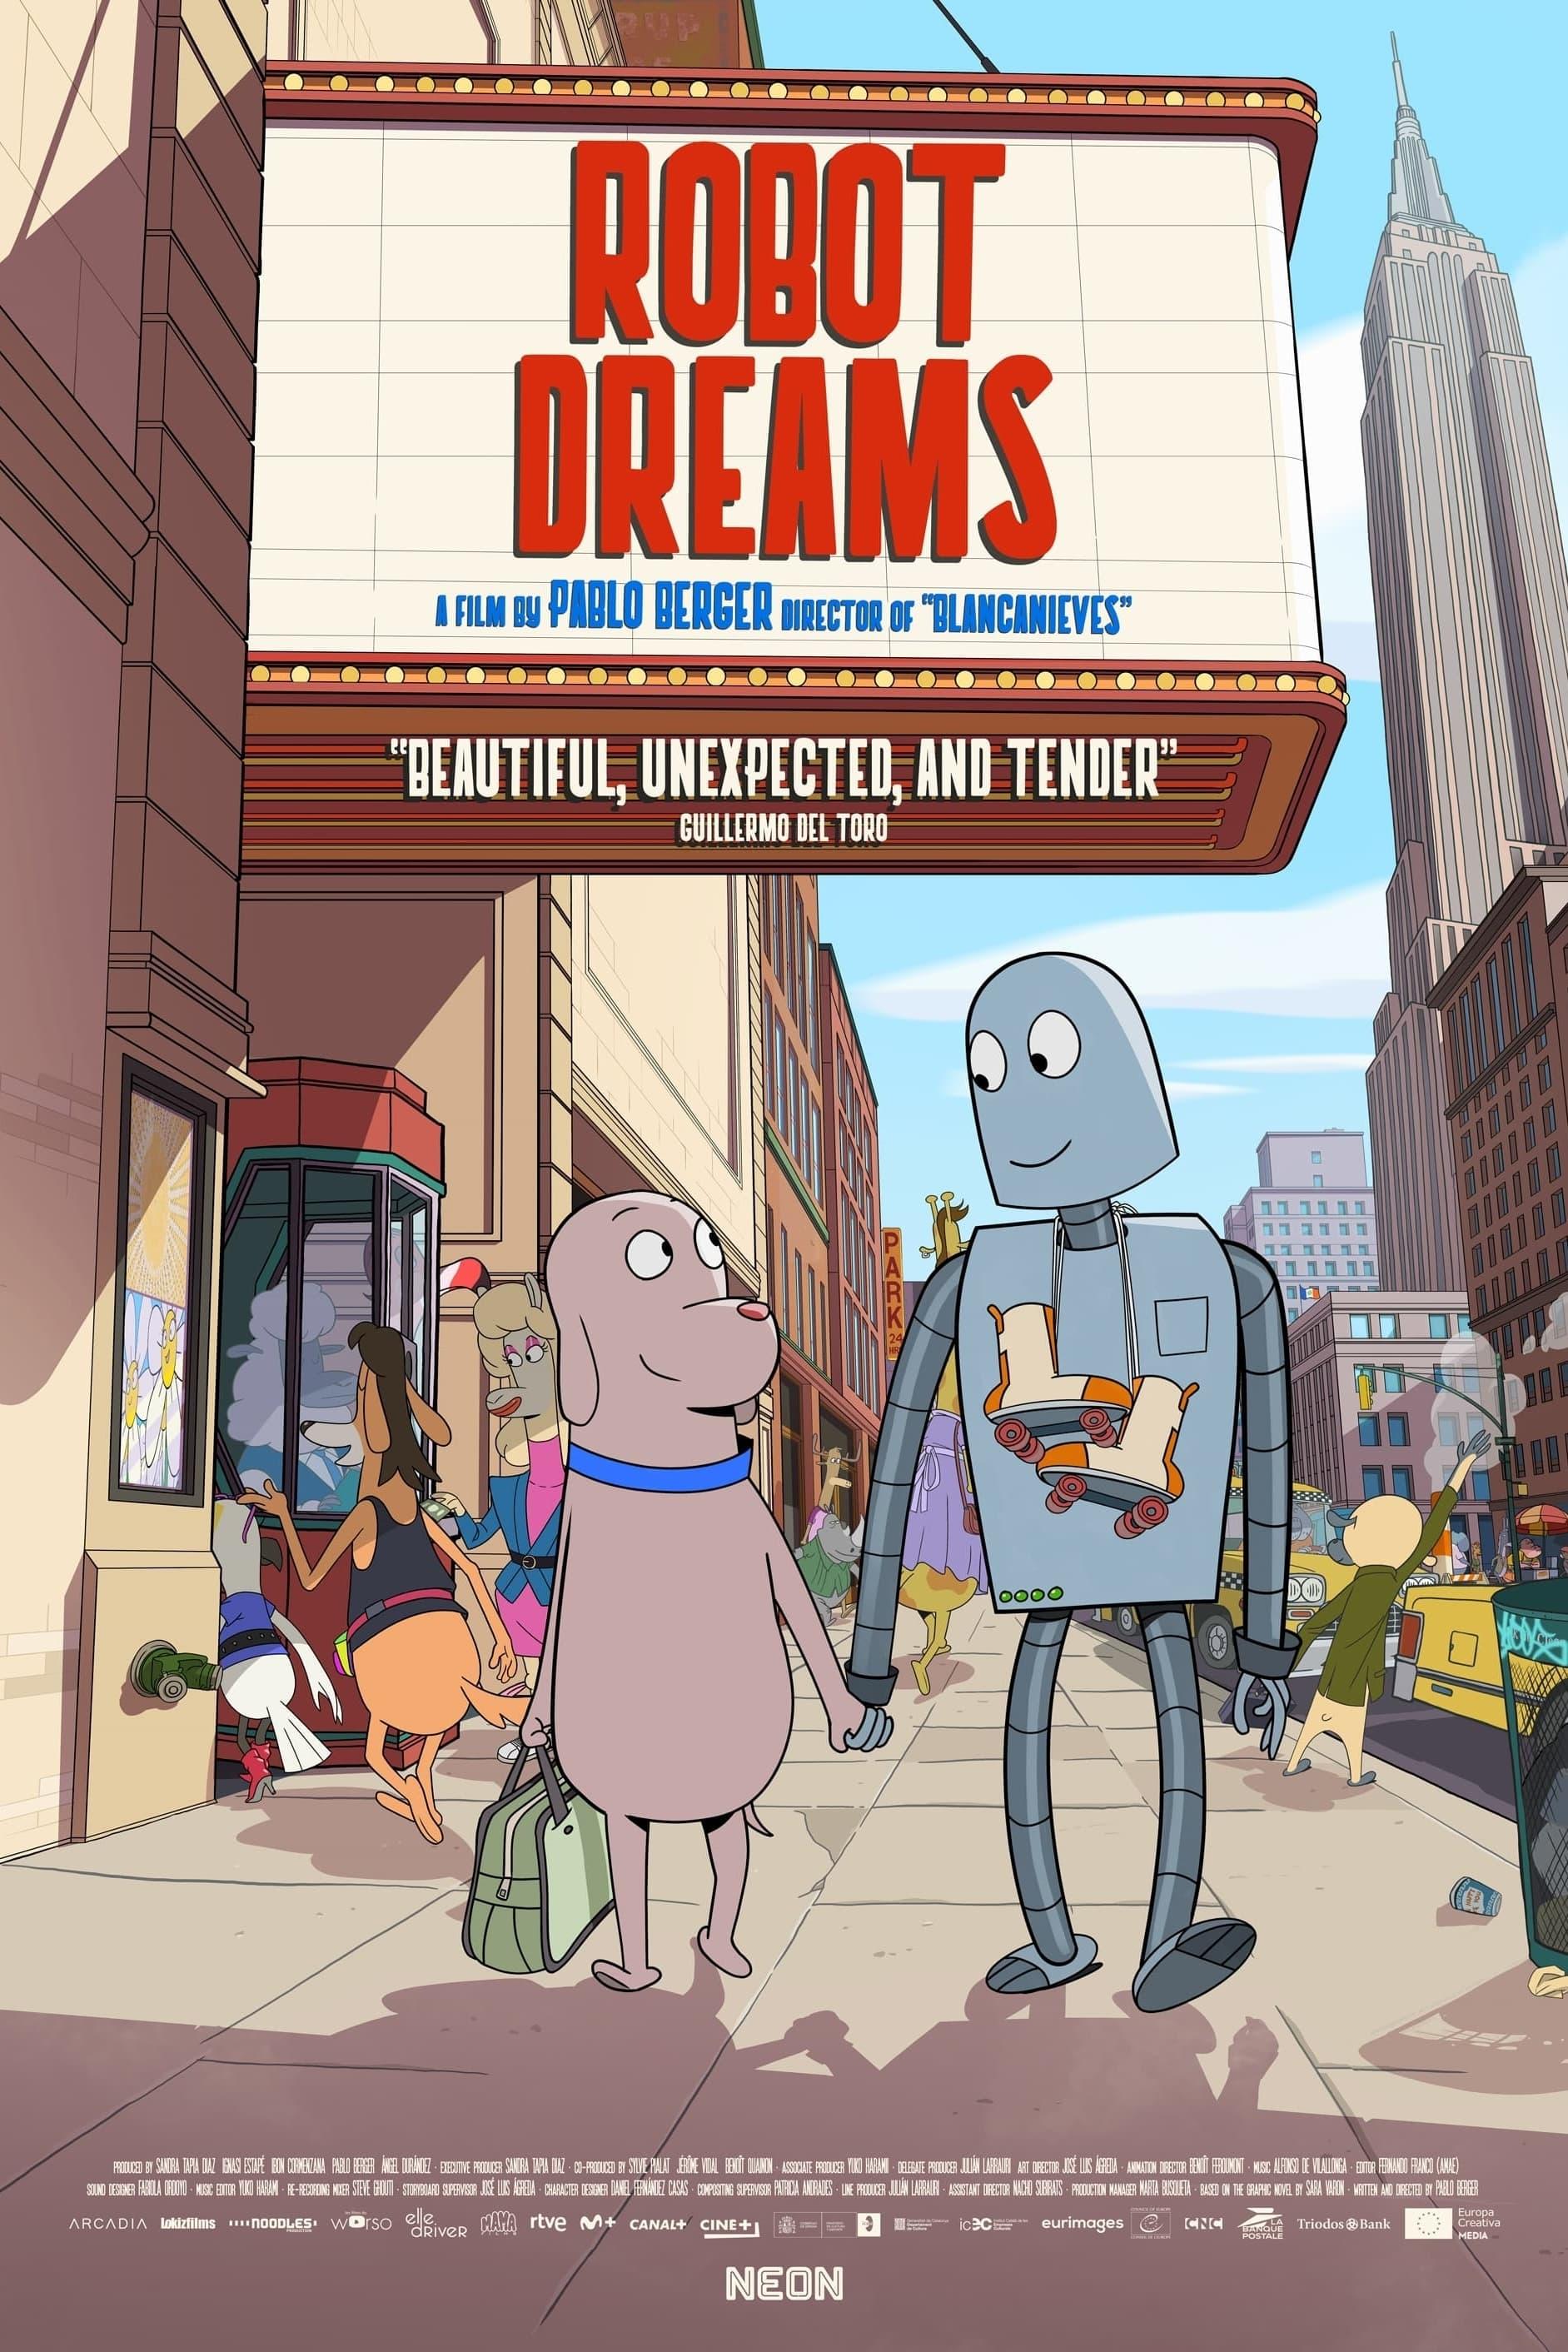 Movie poster of "Robot Dreams"